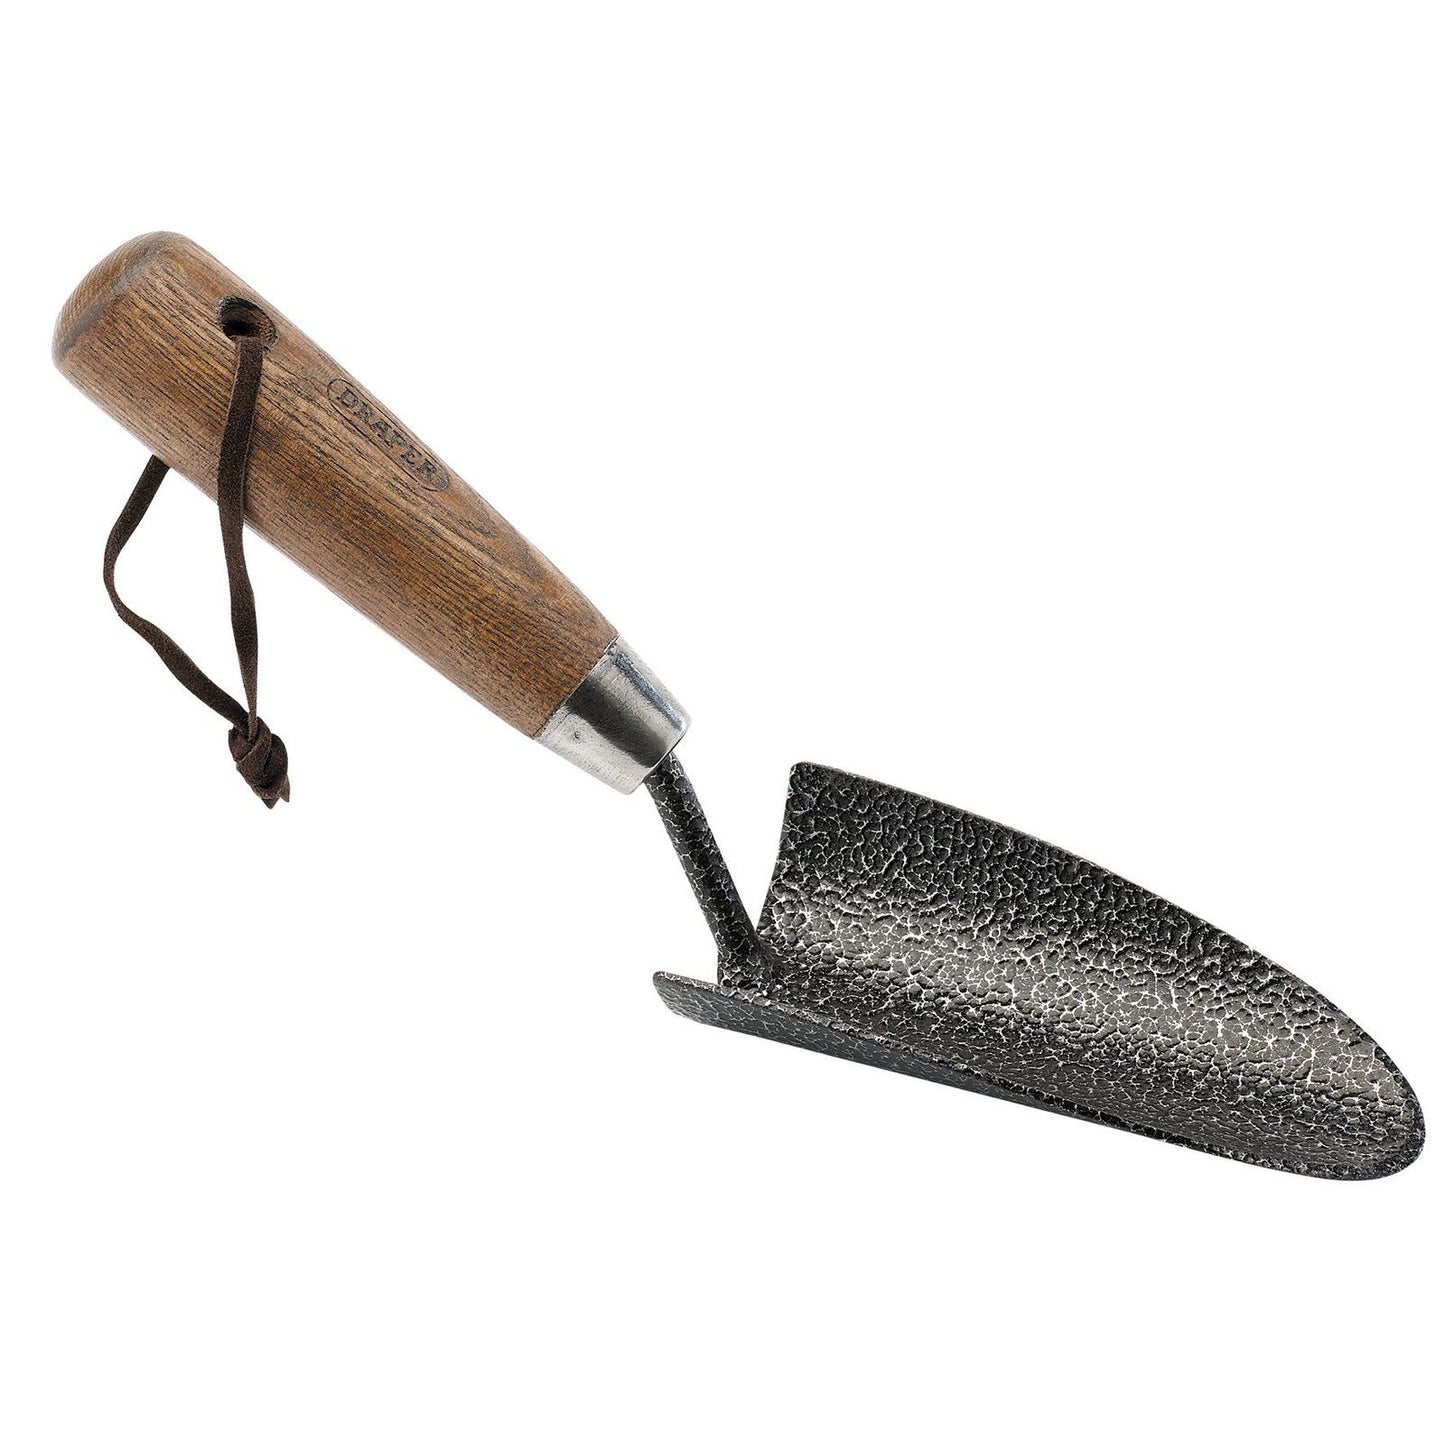 Draper 1x Carbon Steel Heavy Duty Hand Trowel with Ash Handle Professional Tool - 14313